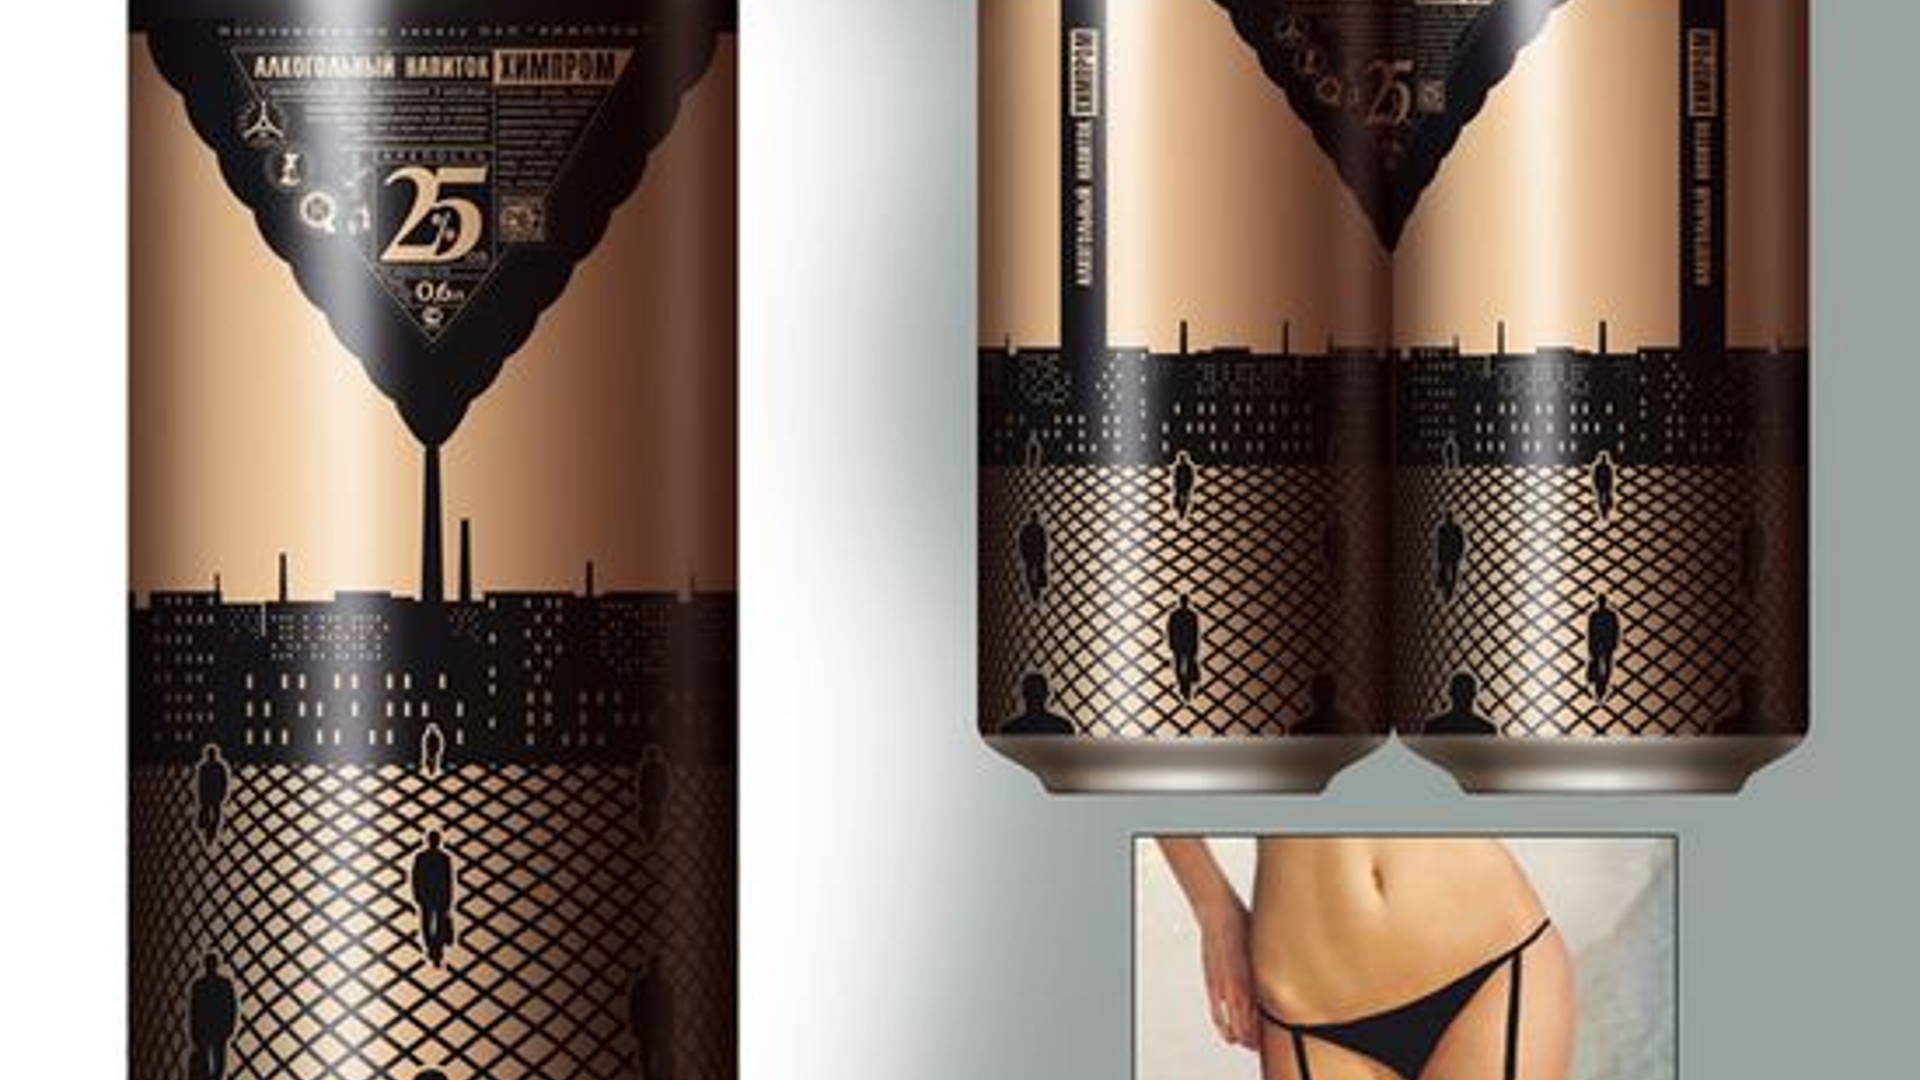 Featured image for Lingerie Beer Cans